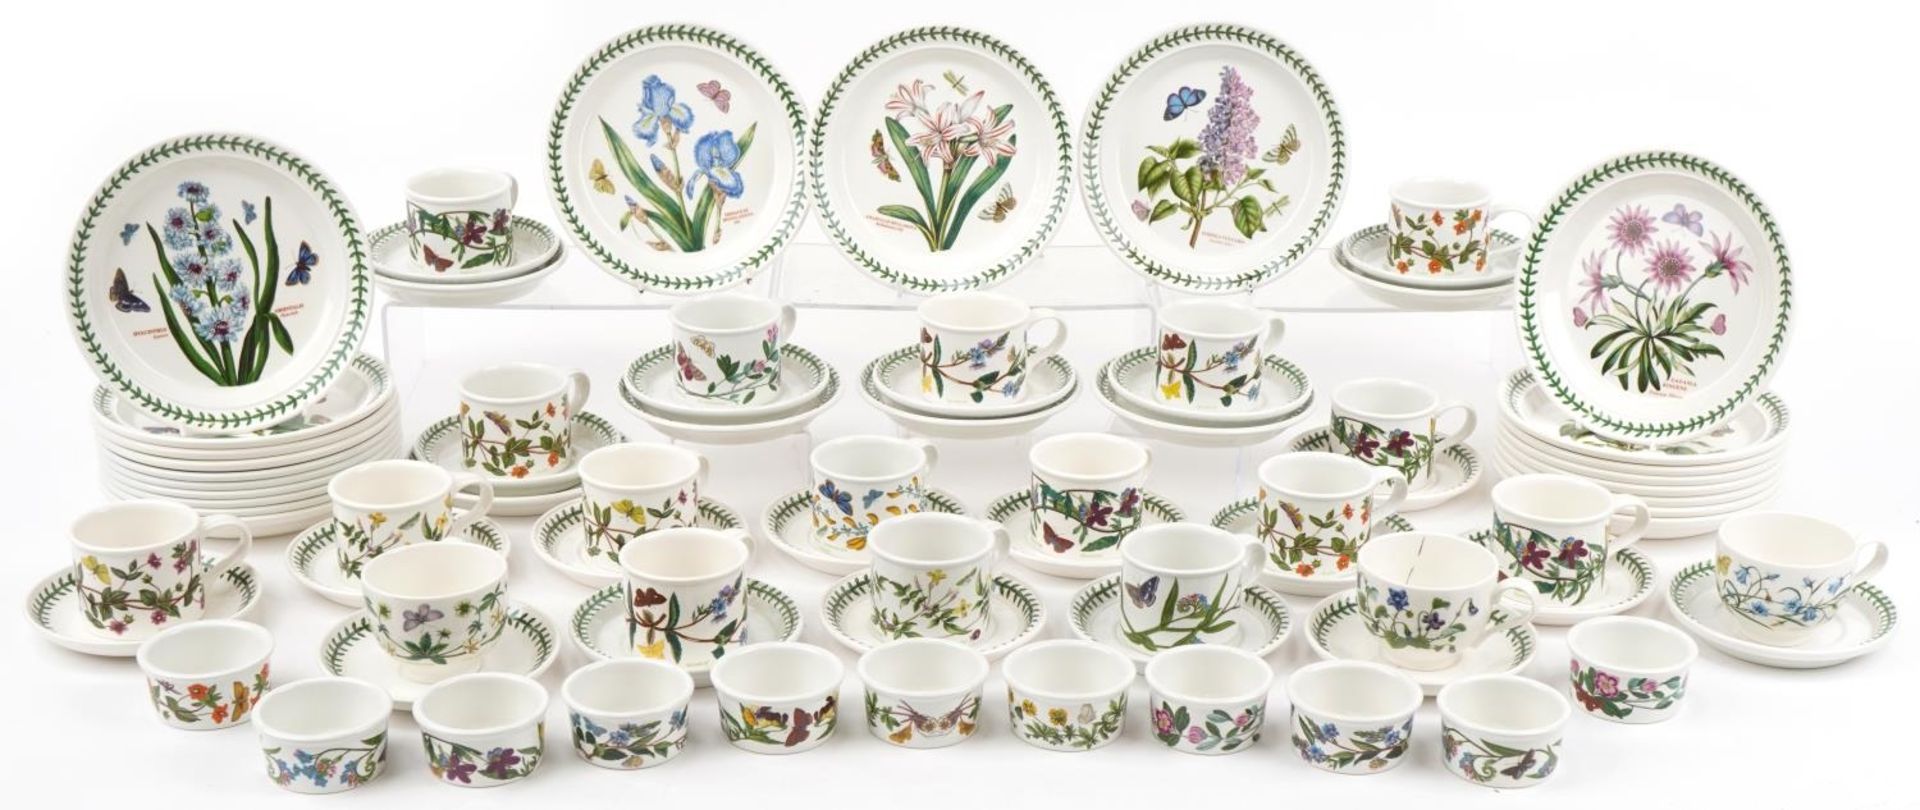 Large collection of Portmeirion Botanic Garden plates, cups with saucers and ramekins, the largest